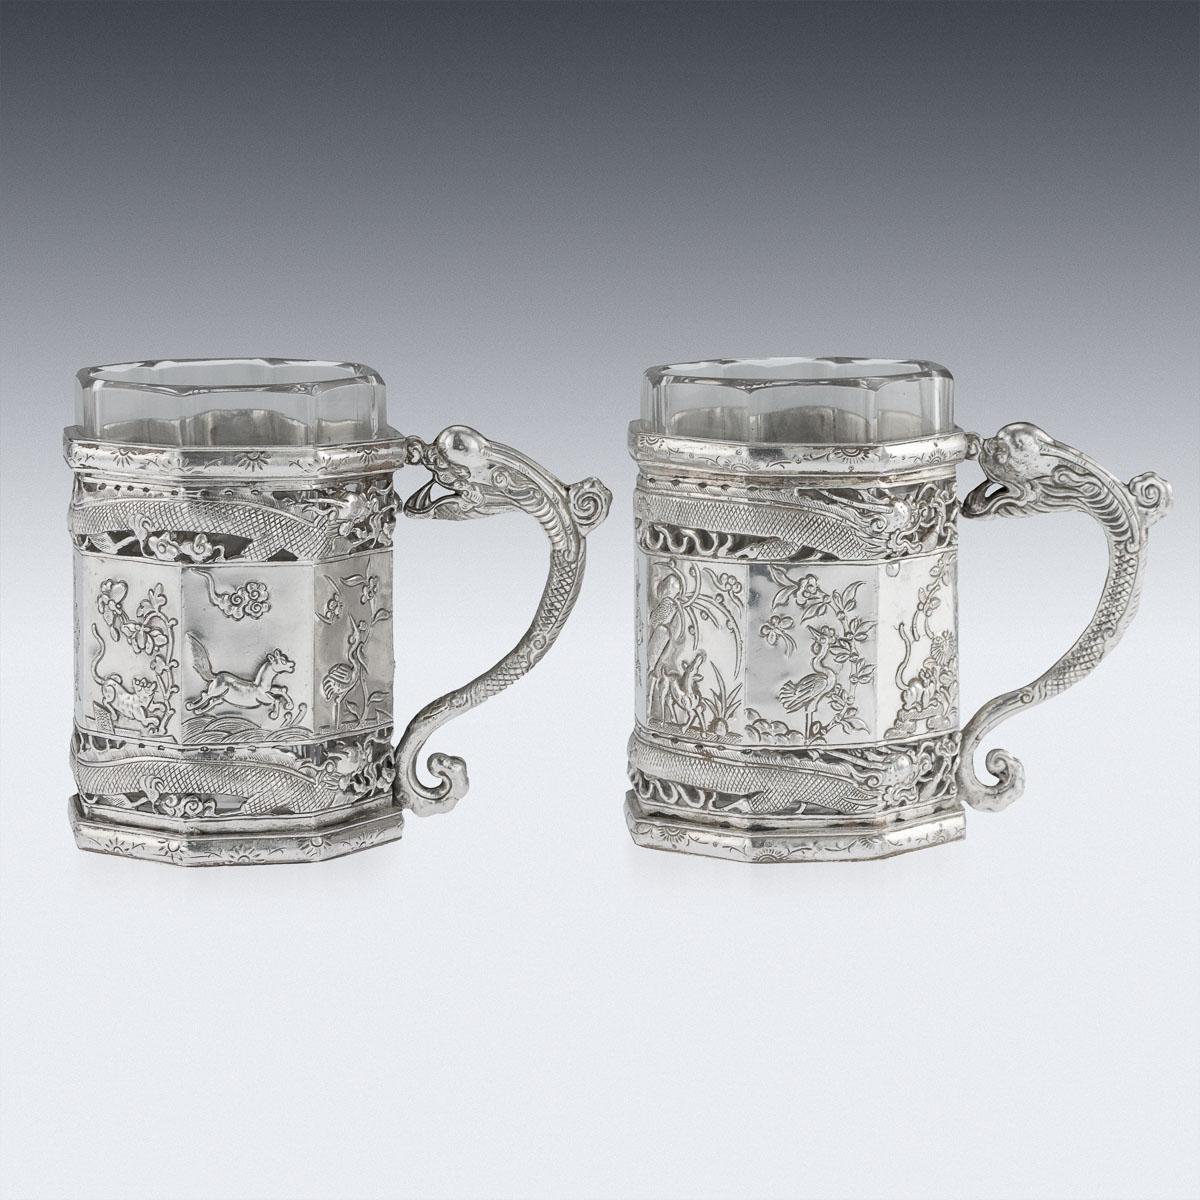 Antique 19th Century Chinese export solid silver tea glass holders, octagonal shaped, the sides are beautifully decorated in relief with various scenes depicting animals and birds in landscape, very crisp and detailed, the front engraved with